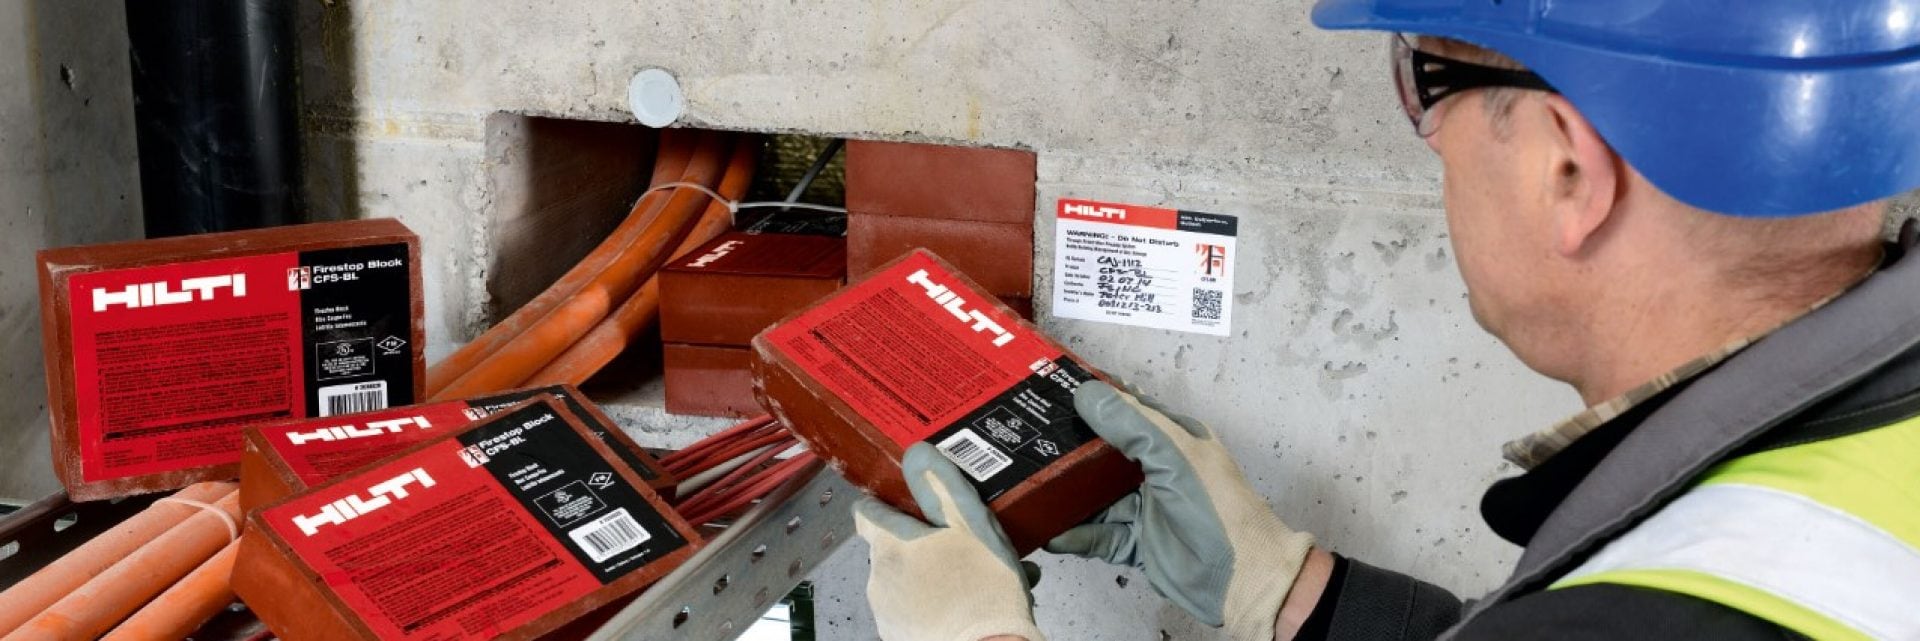 Hilti firestop for  electrical penetrations